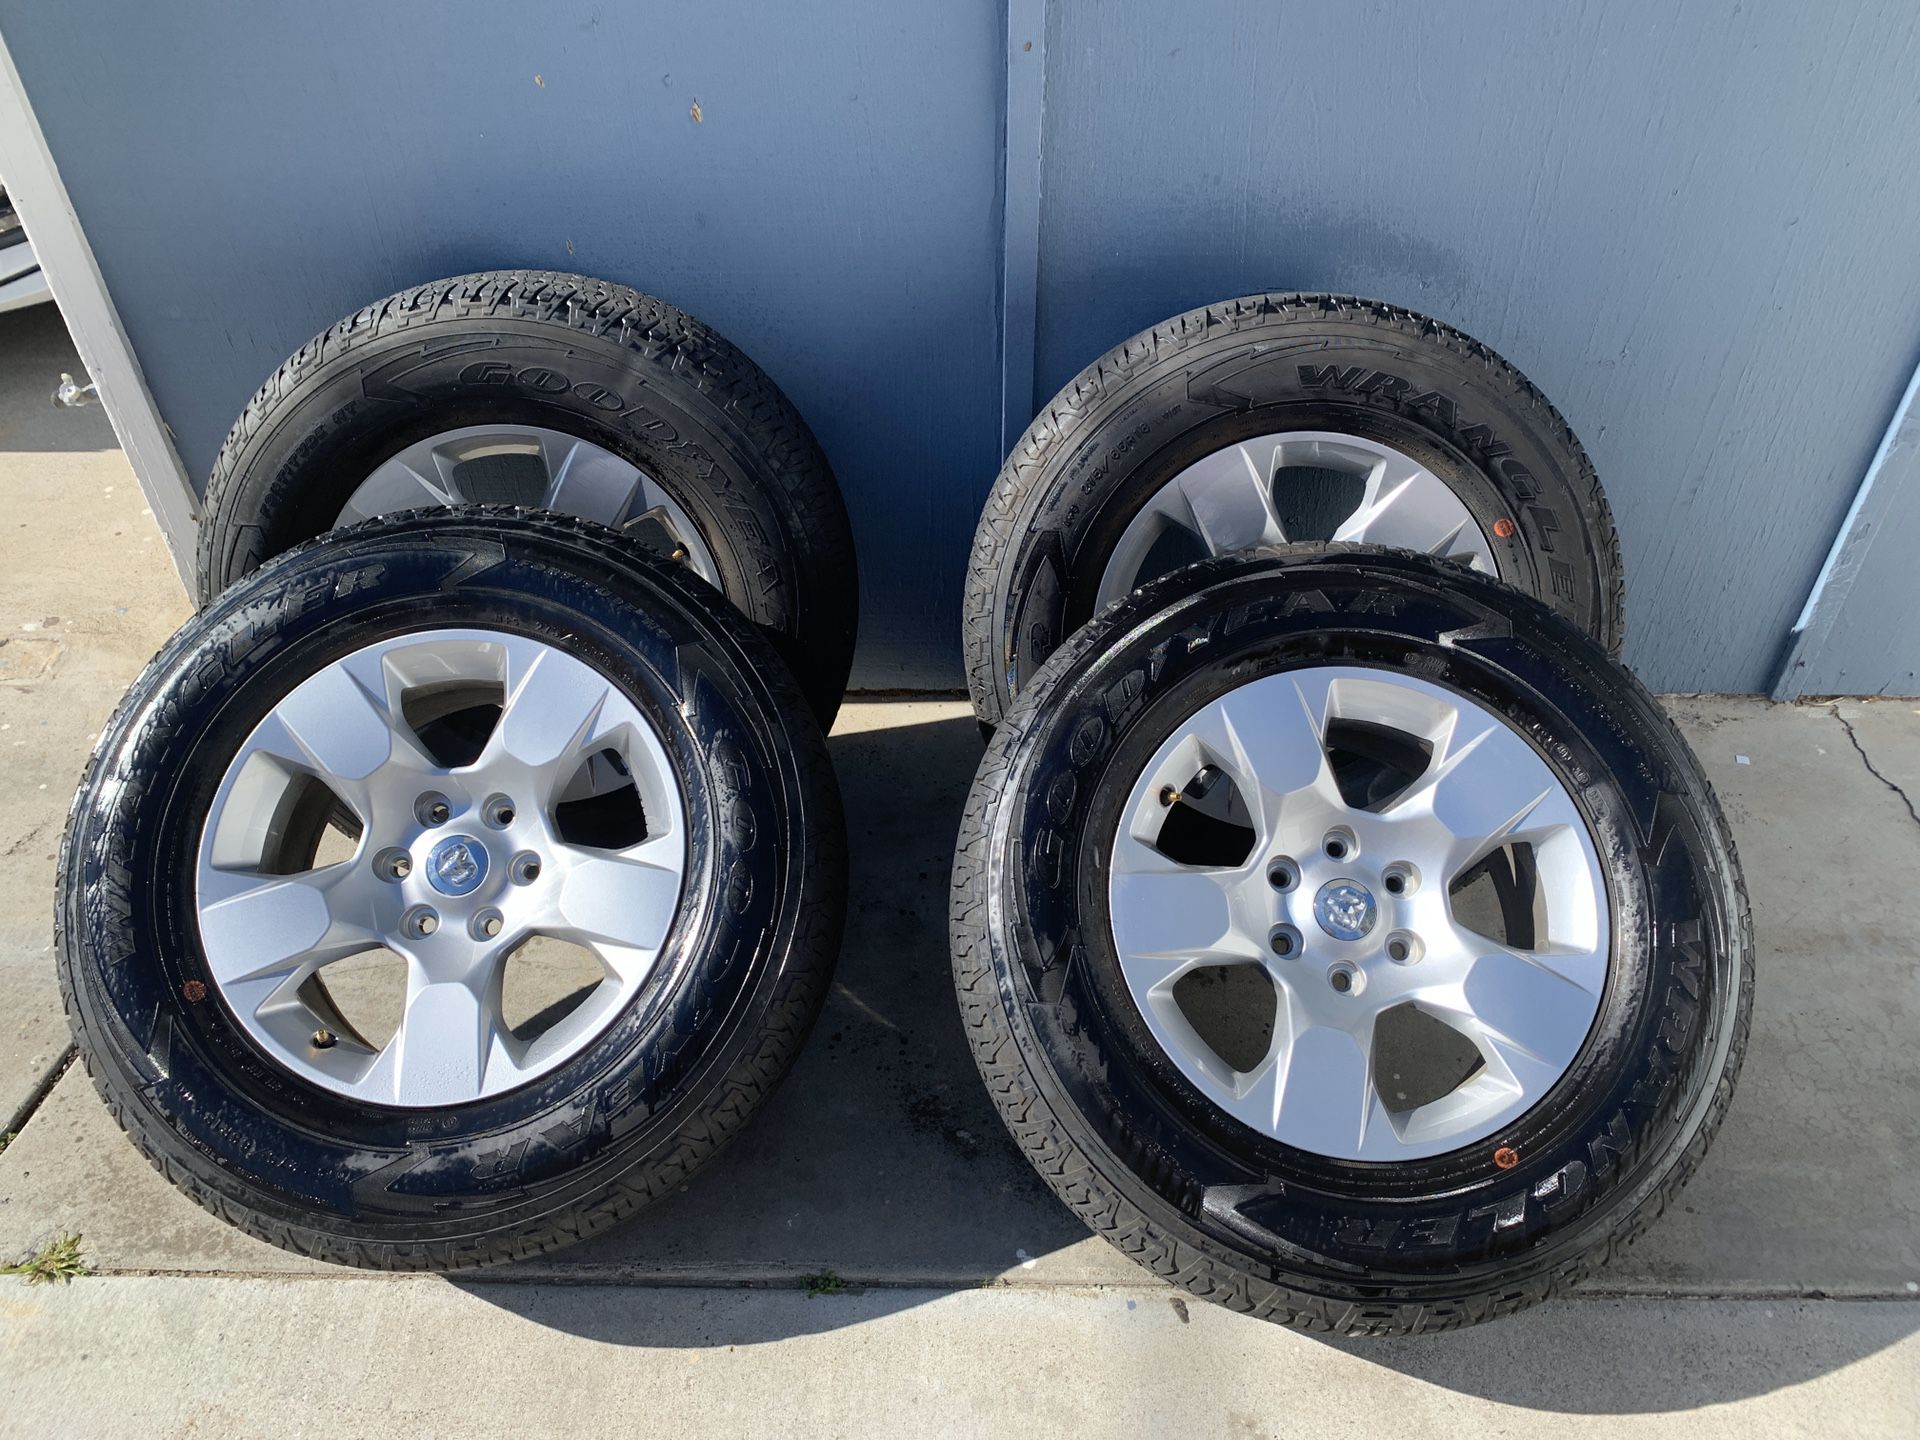 Ram 1500 Rims Wheels and Tires - 641 miles on them